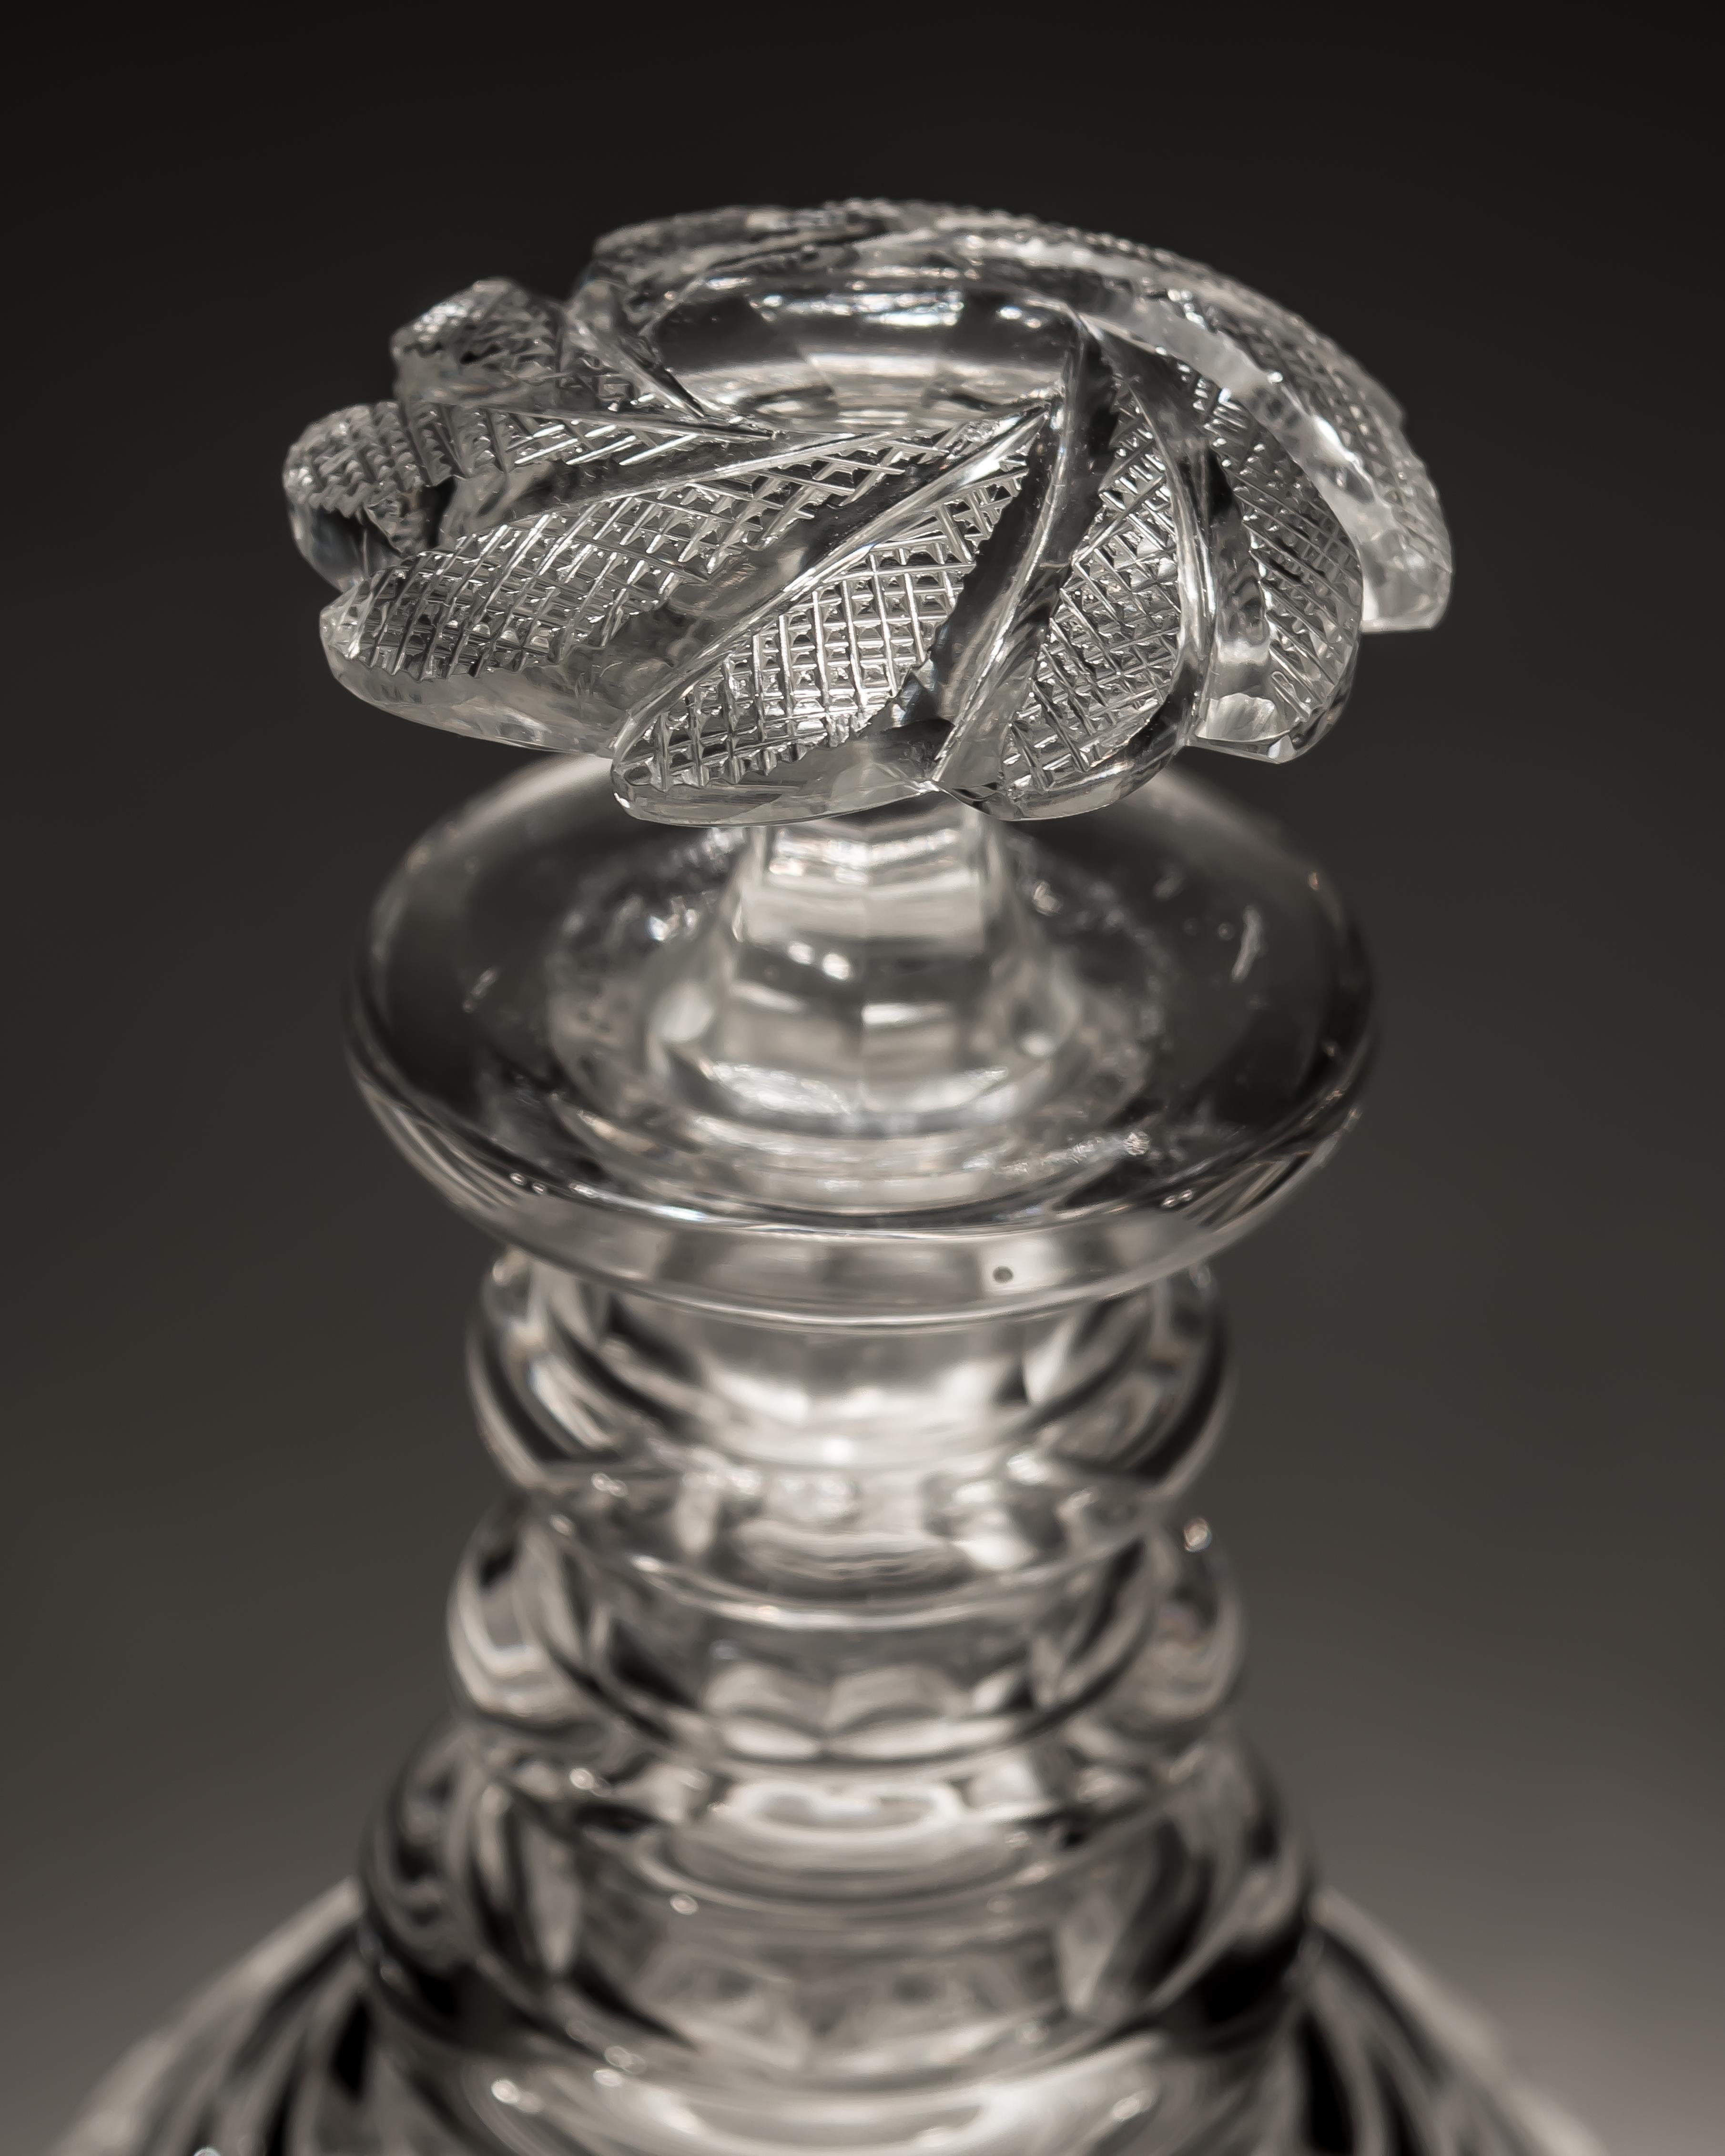 Exceptional pair of swirl cut Regency decanters with swirl cut stoppers.